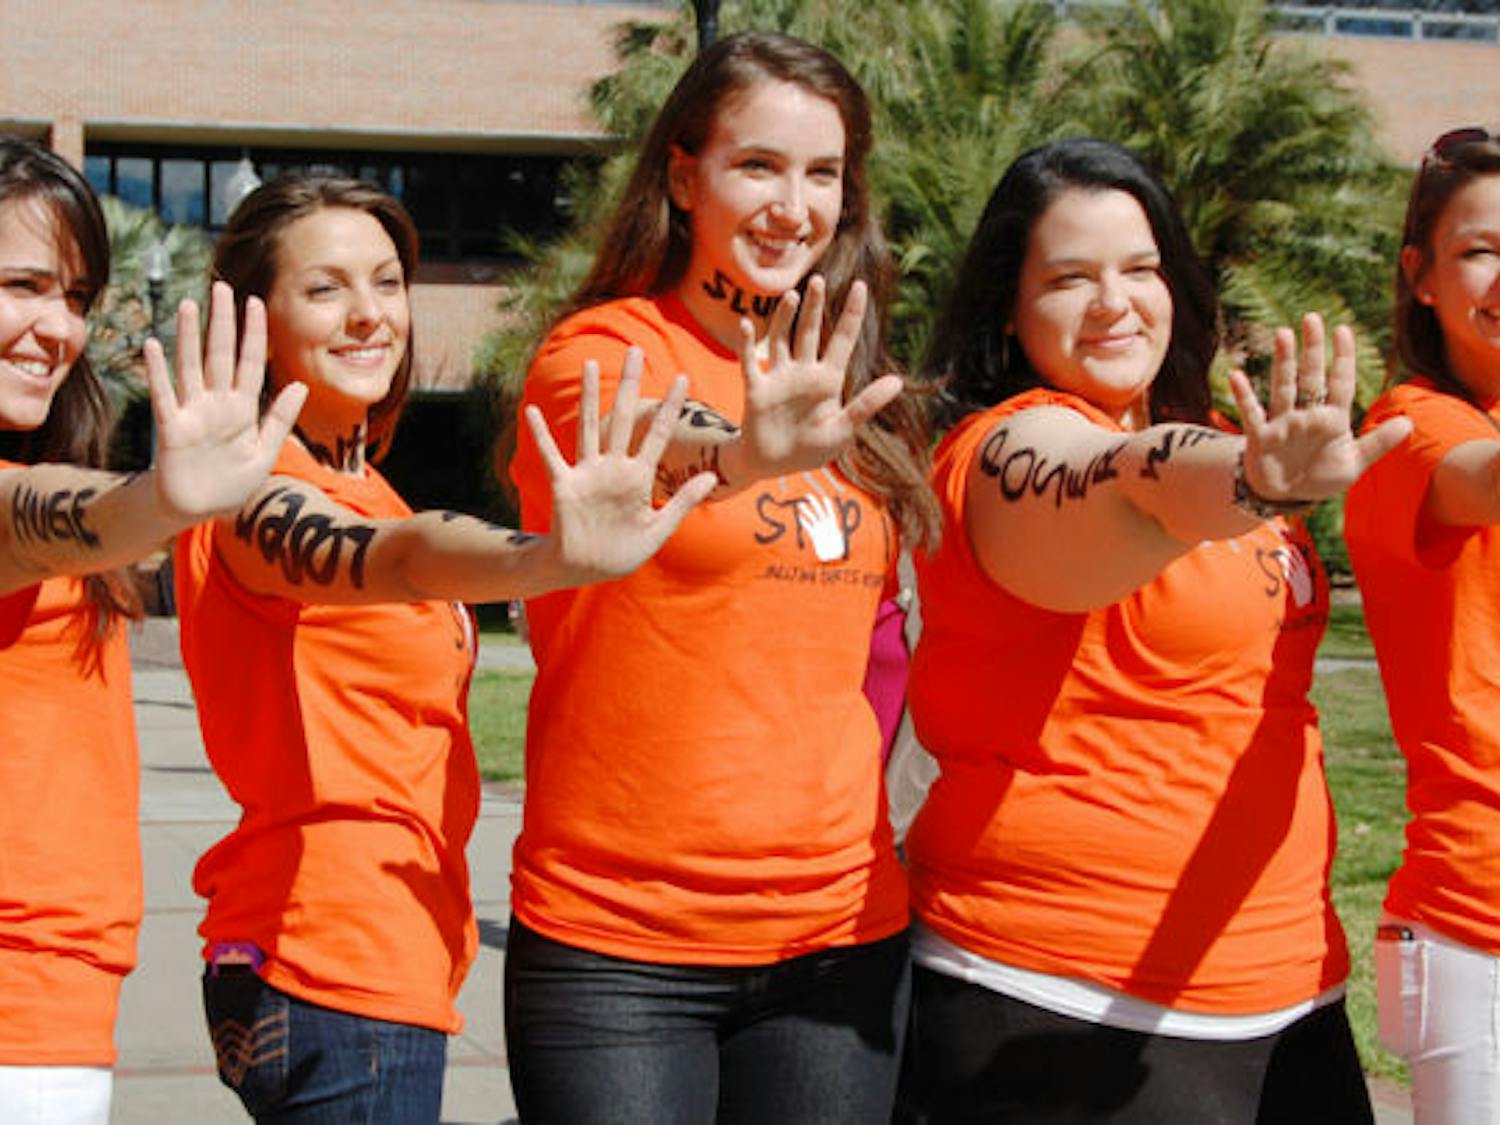 Members of UF’s Bateman Team strike their signature pose during the “Spot It, Stop It” anti-bullying campaign Tuesday afternoon on the Reitz Union North Lawn.